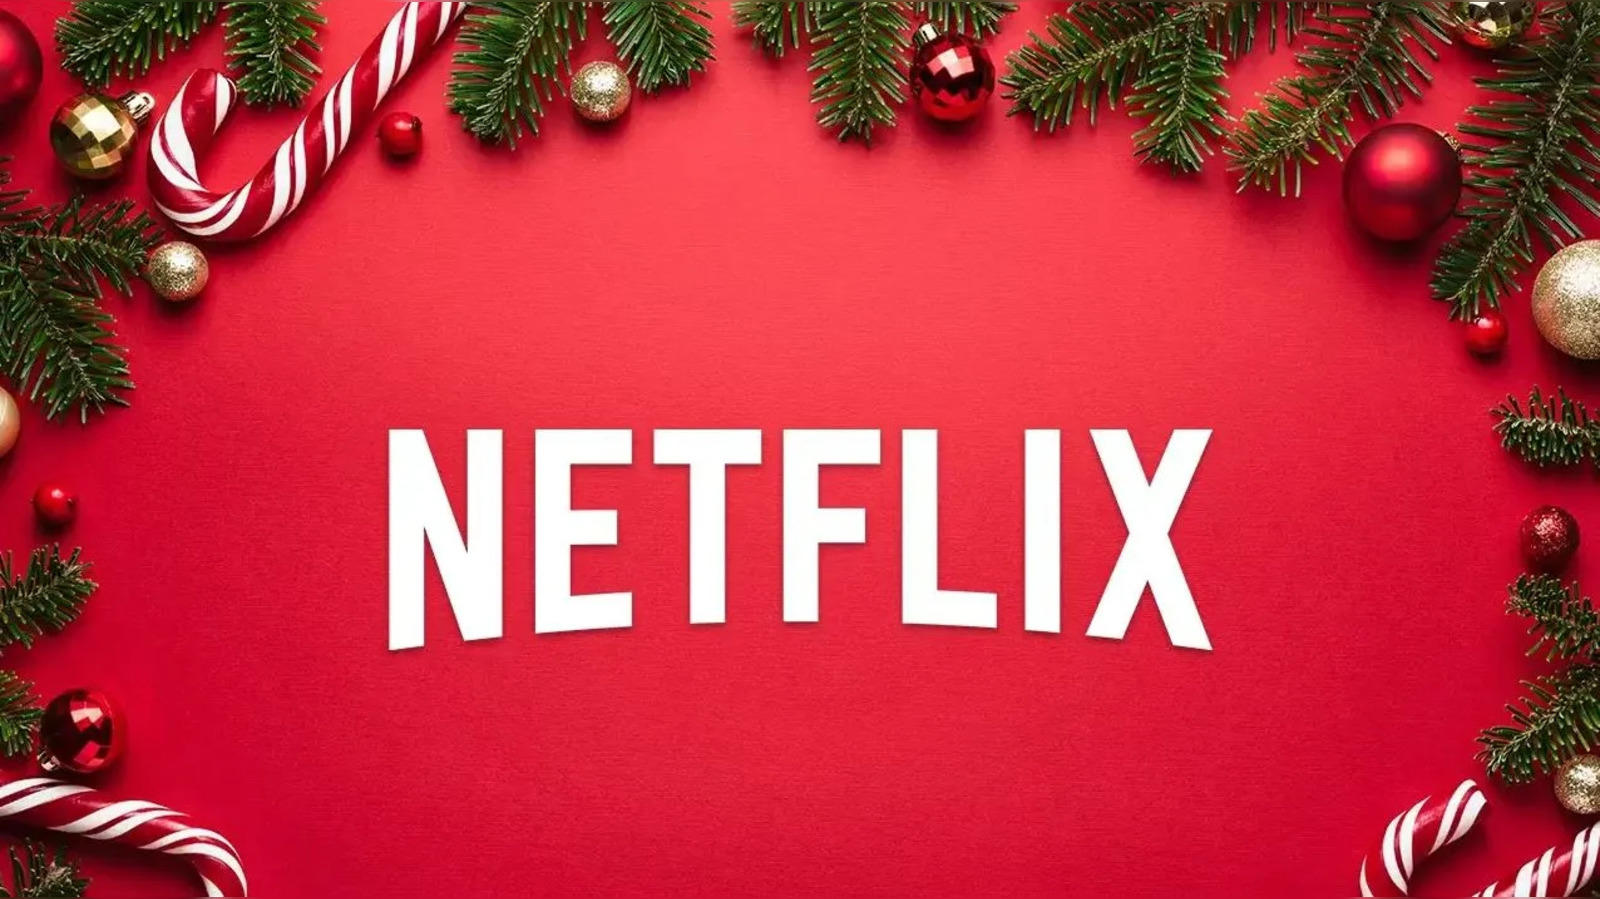 Finding new movies on Netflix? Here's the list of all films